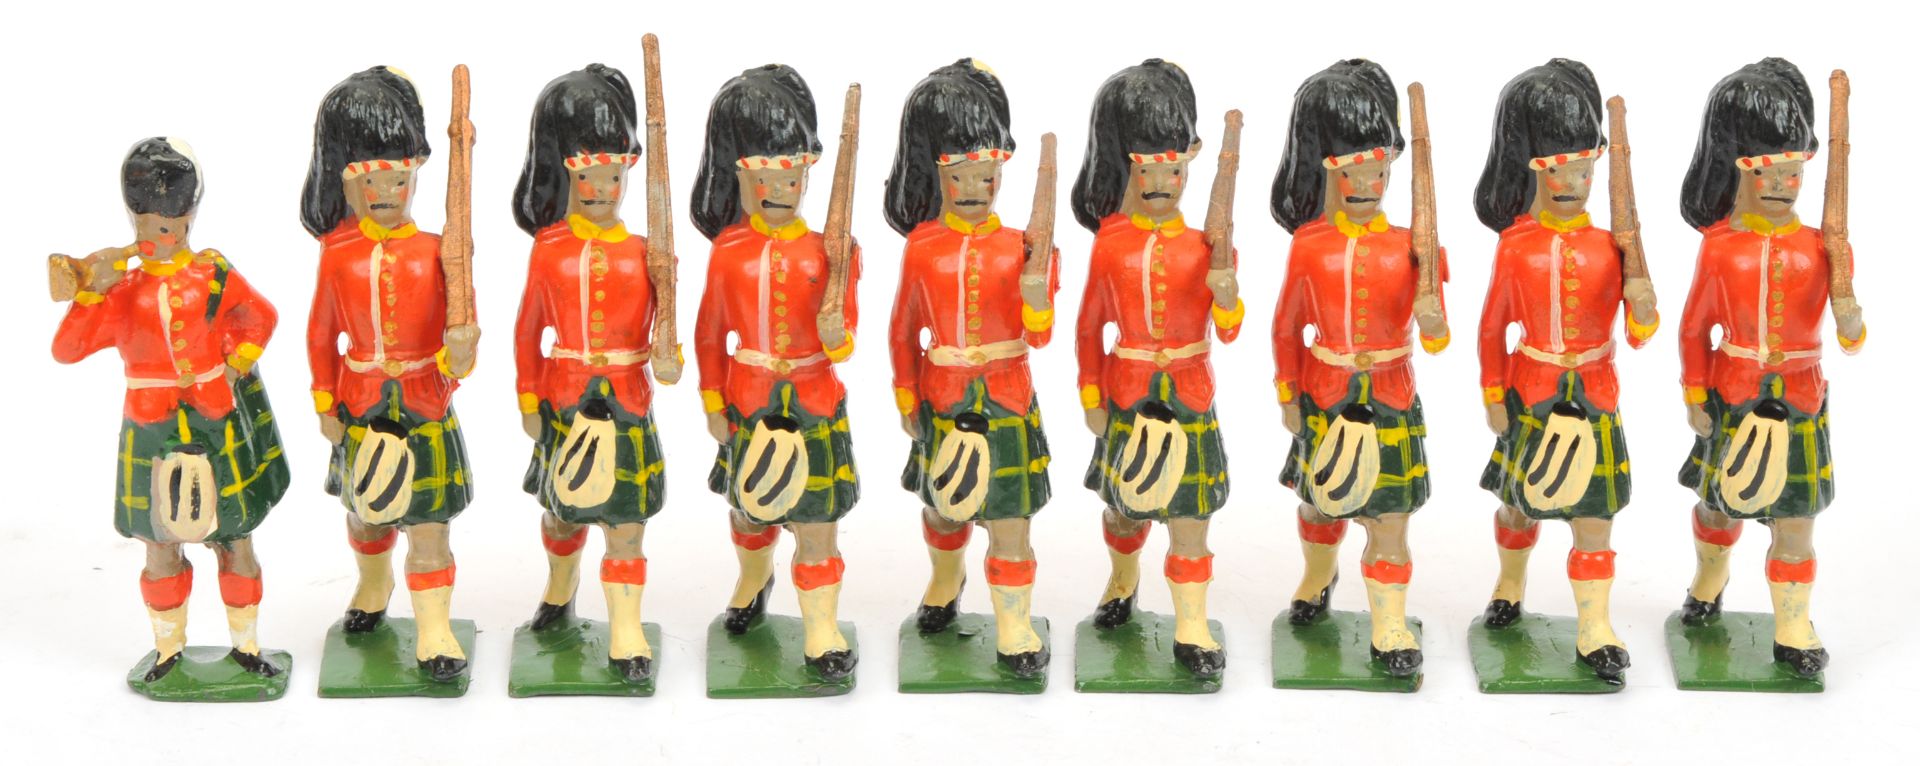 Britains - From Various Gordon Highlanders Sets [1914 Version / Pre War Issues]